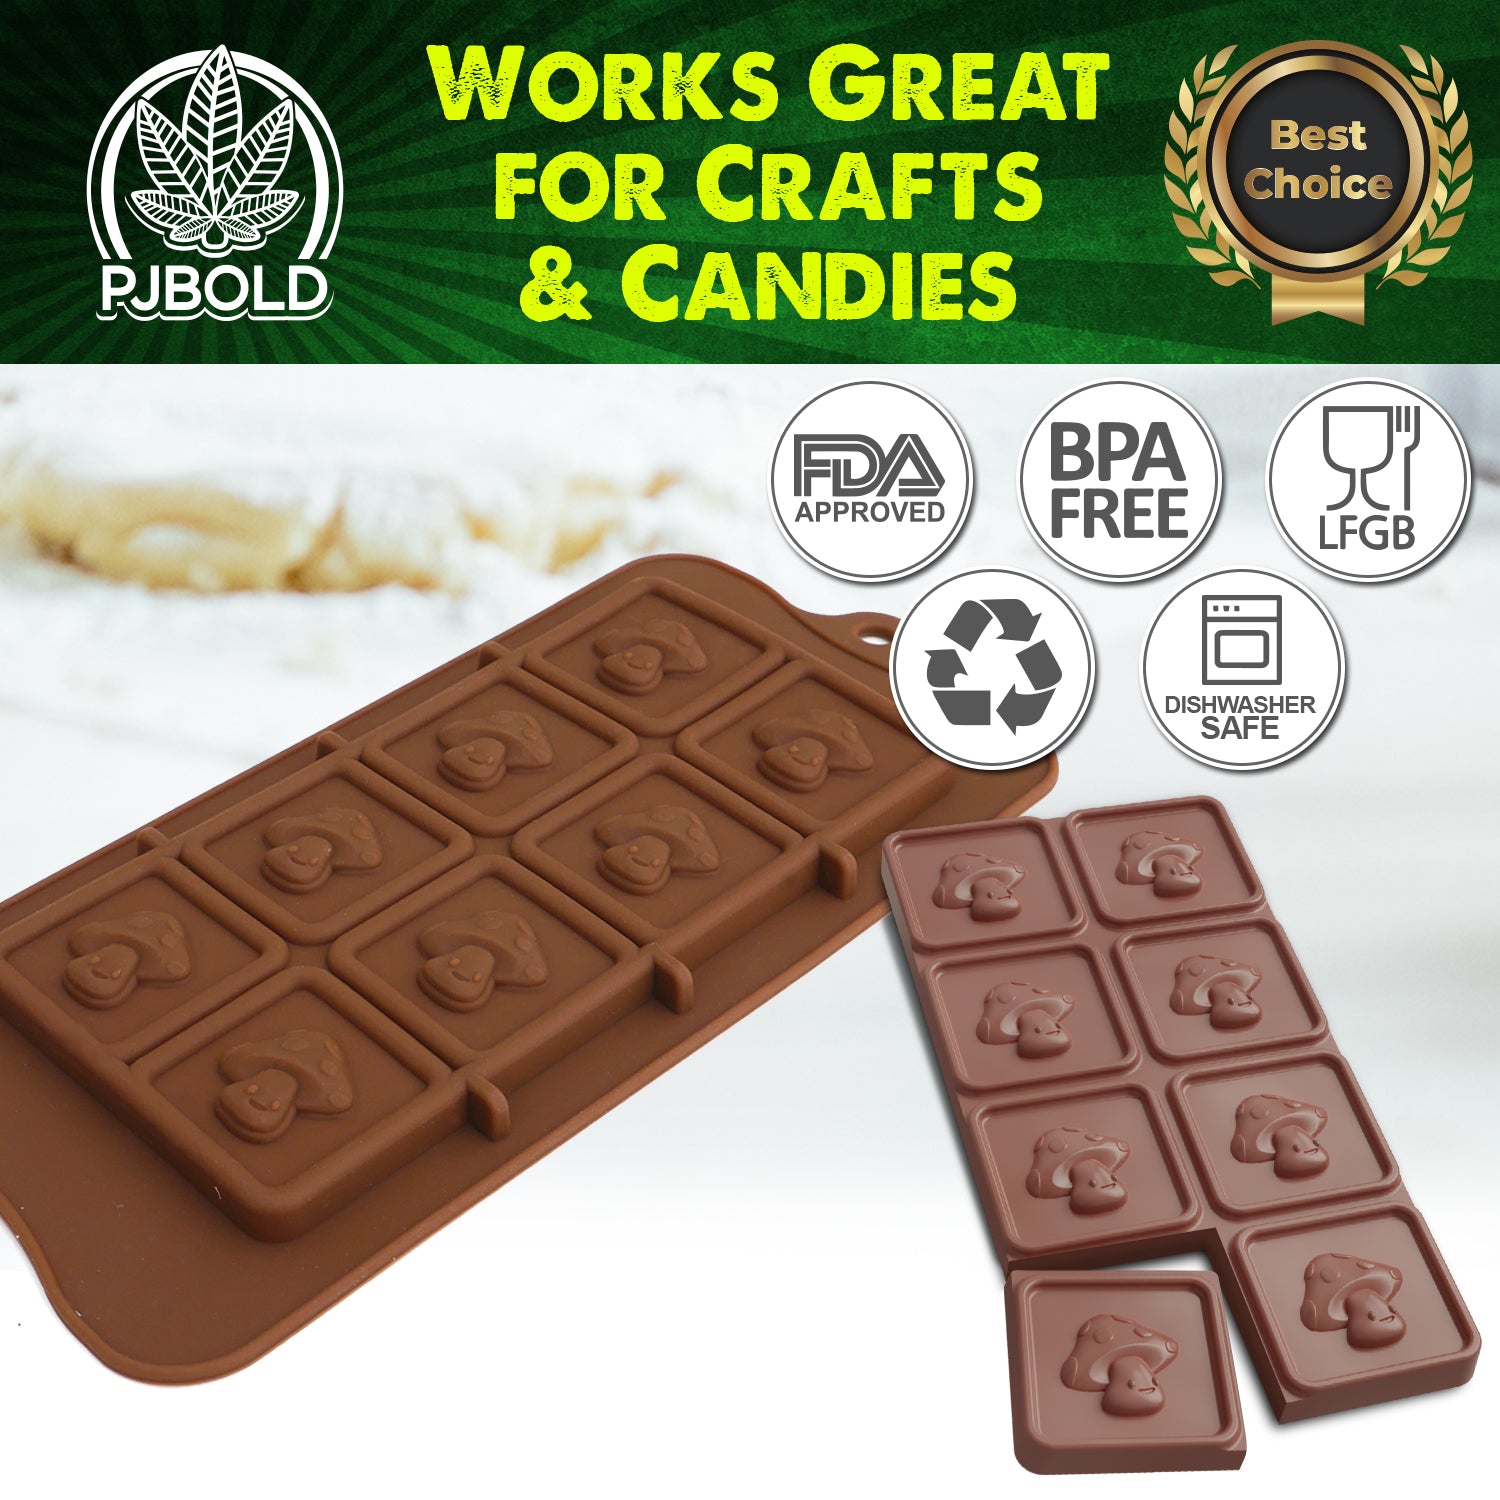 Chocolate Bar Moulds Food Grade Silicone Chocolate Molds 18 Options  Available Blocky Choc Candy Mold Confectionery Baking Tools